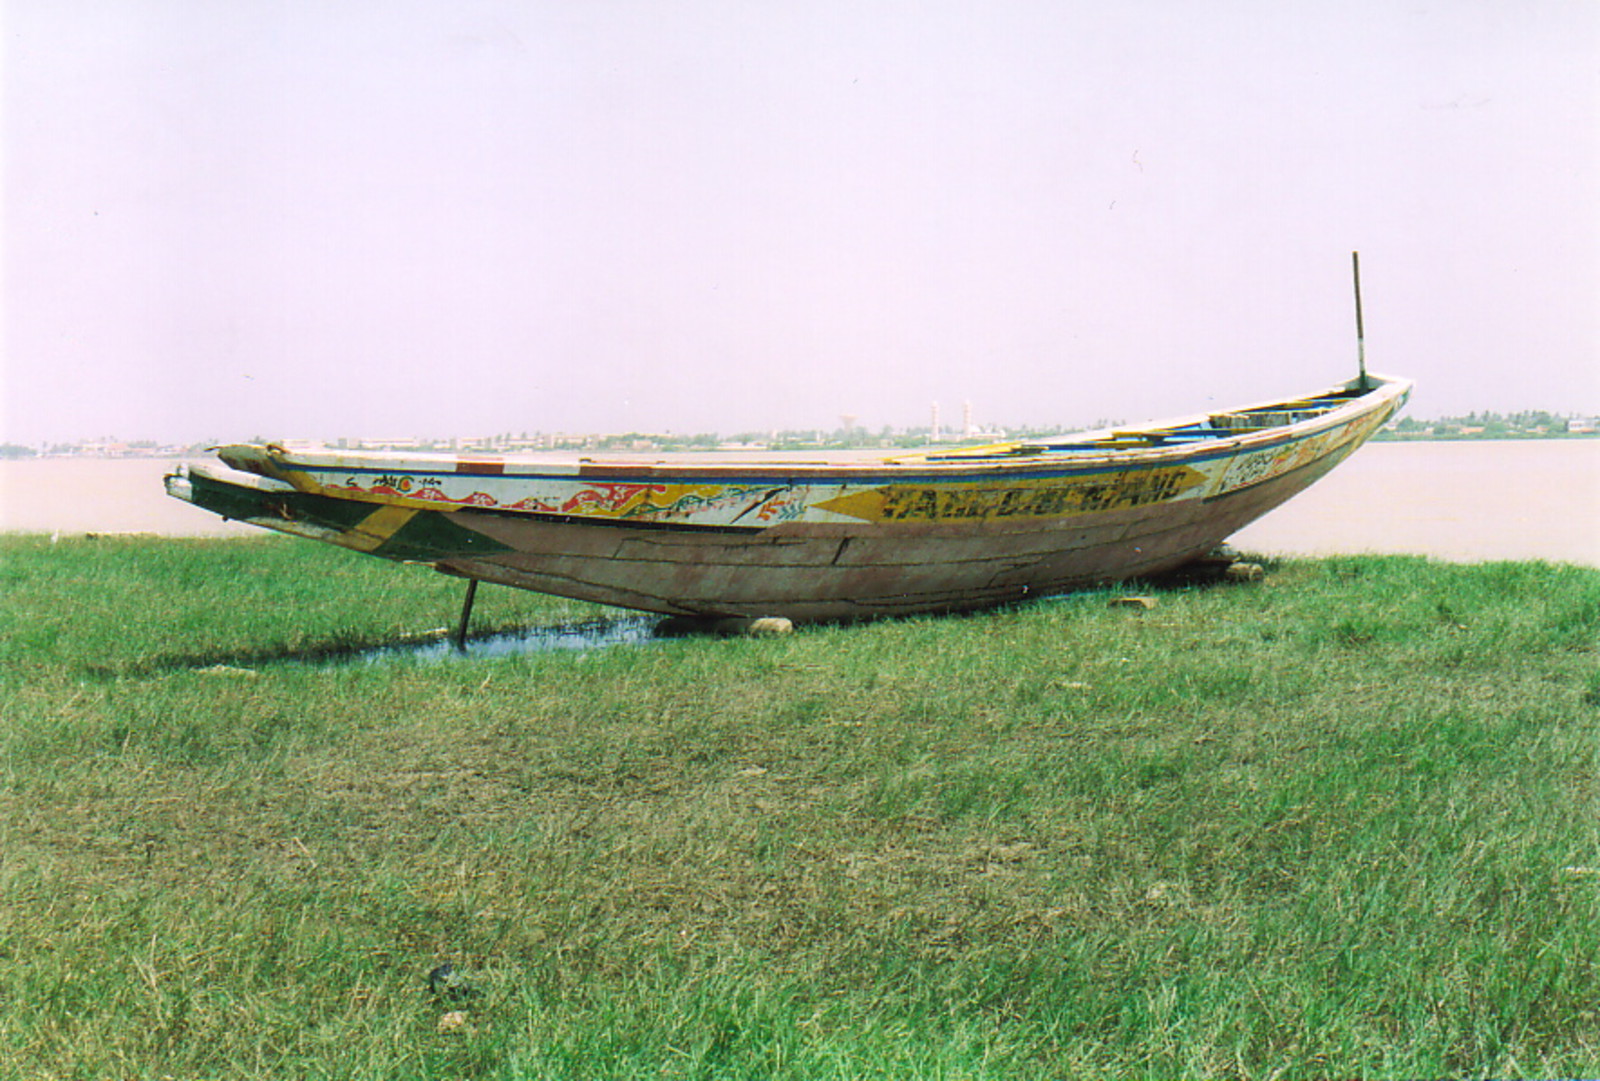 A fisherman's pirogue in the River Senegal